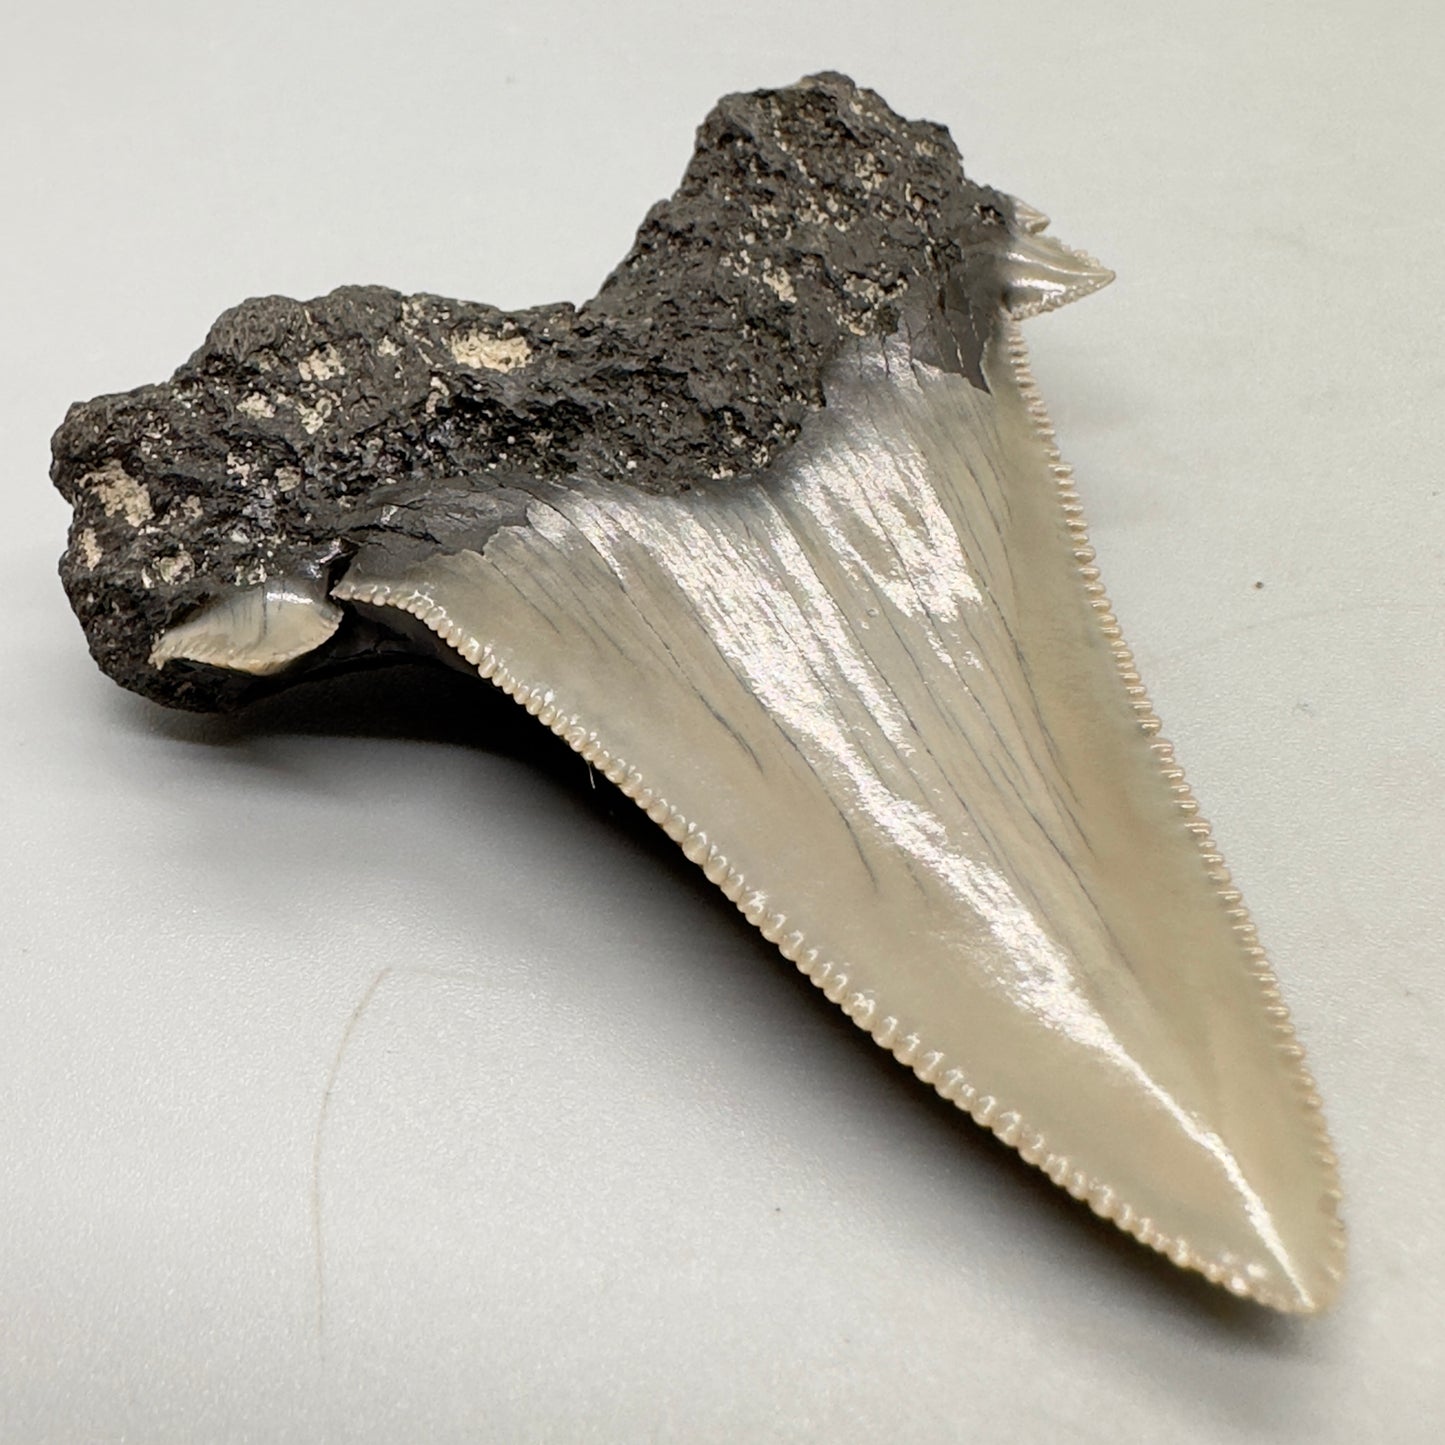 Large, sharply serrated 2.71 inches Carcharocles sokolowi (auriculatus) shark tooth from South Carolina AU366 back left